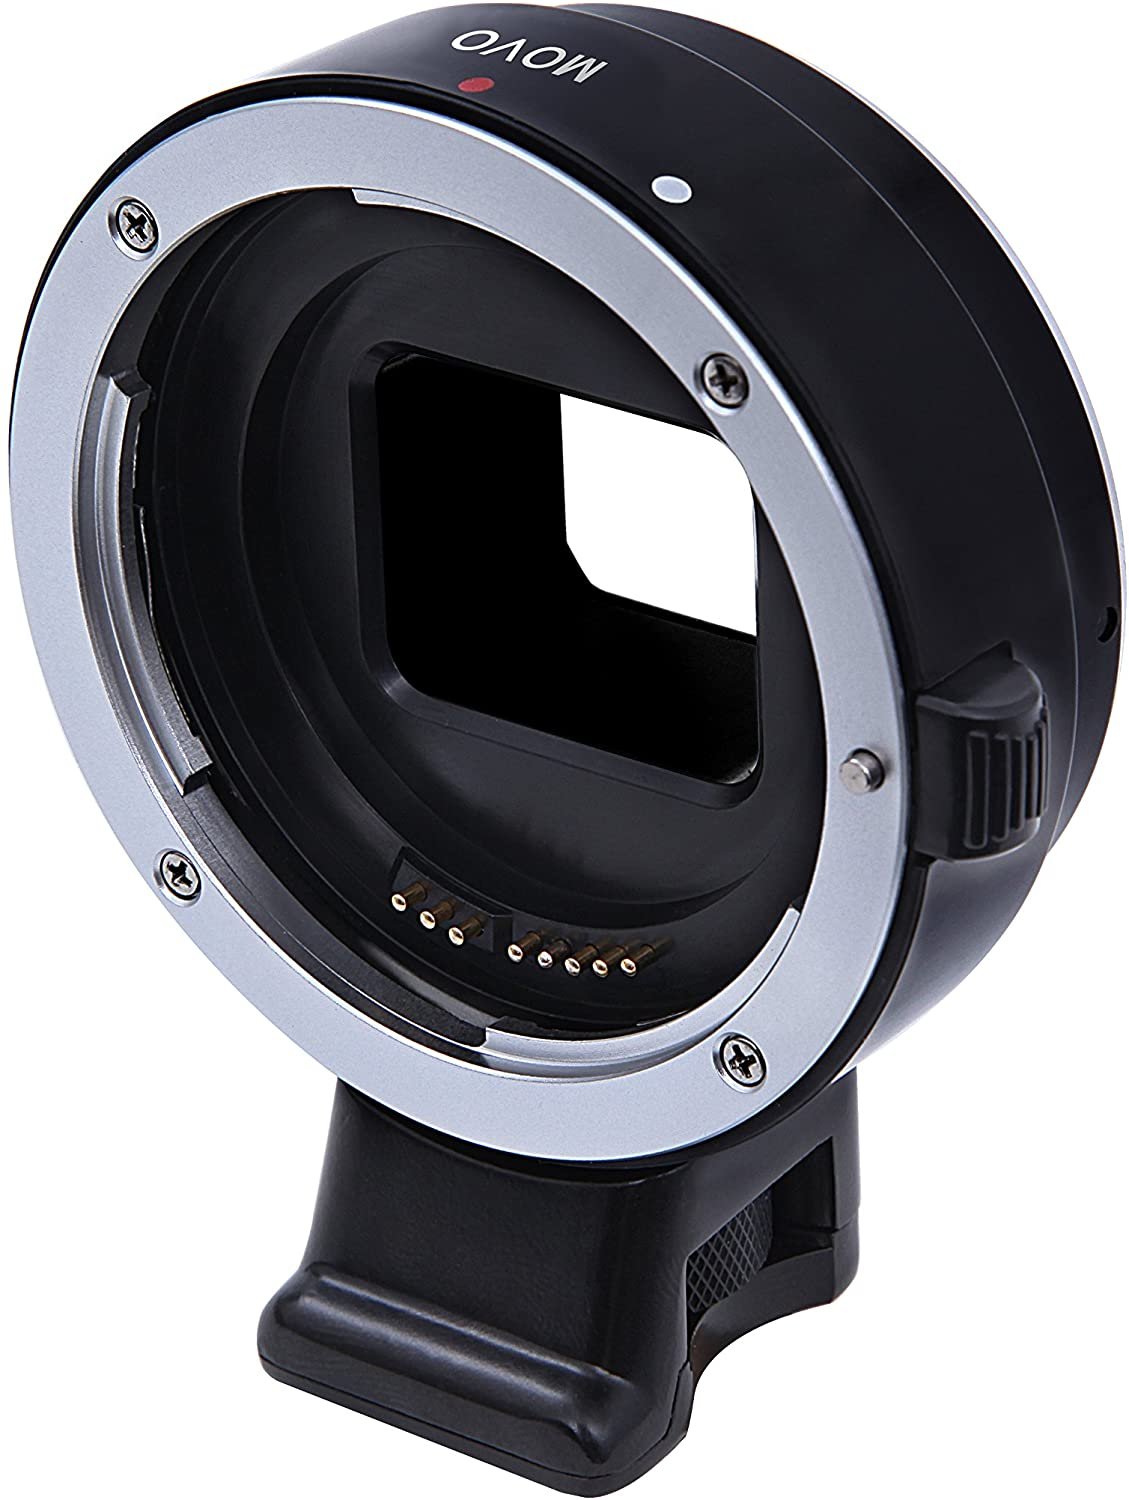 Movo Photo CTS100 Lens Adapter for Sony NEX Mirrorless Cameras Body to fit Canon EOS EF/EF-S Lenses